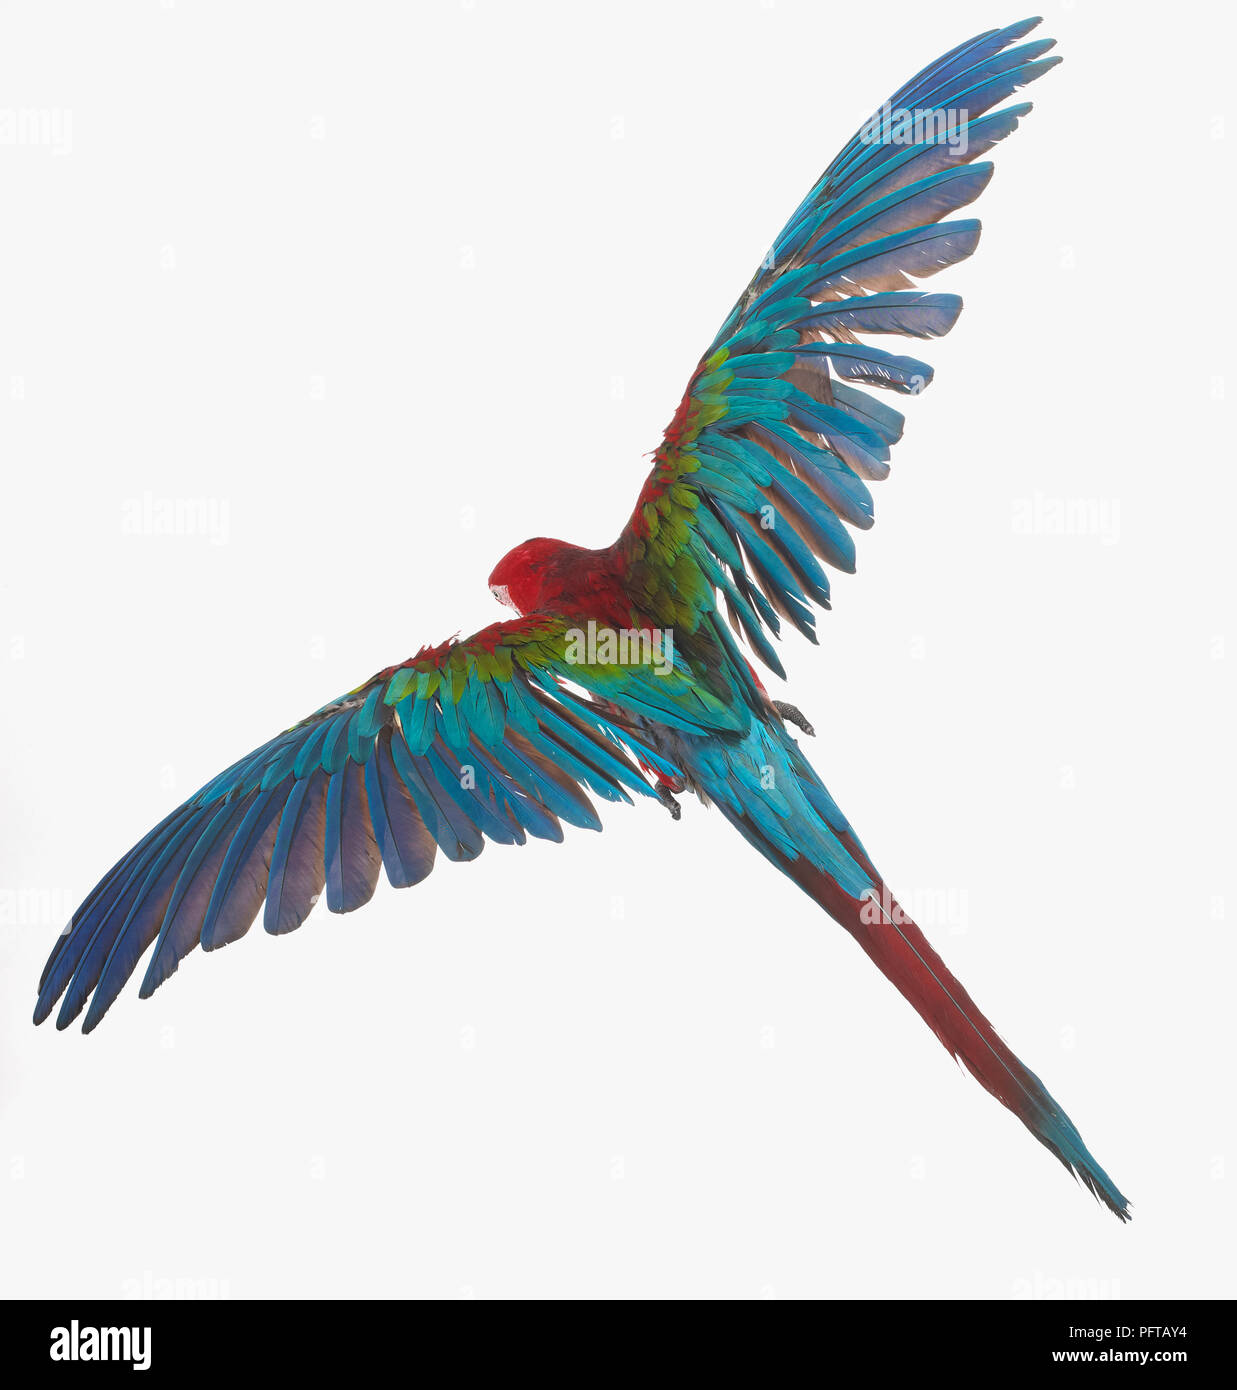 Green-winged Macaw, Red-and-green Macaw (Ara chloropterus), parrot, view from above Stock Photo